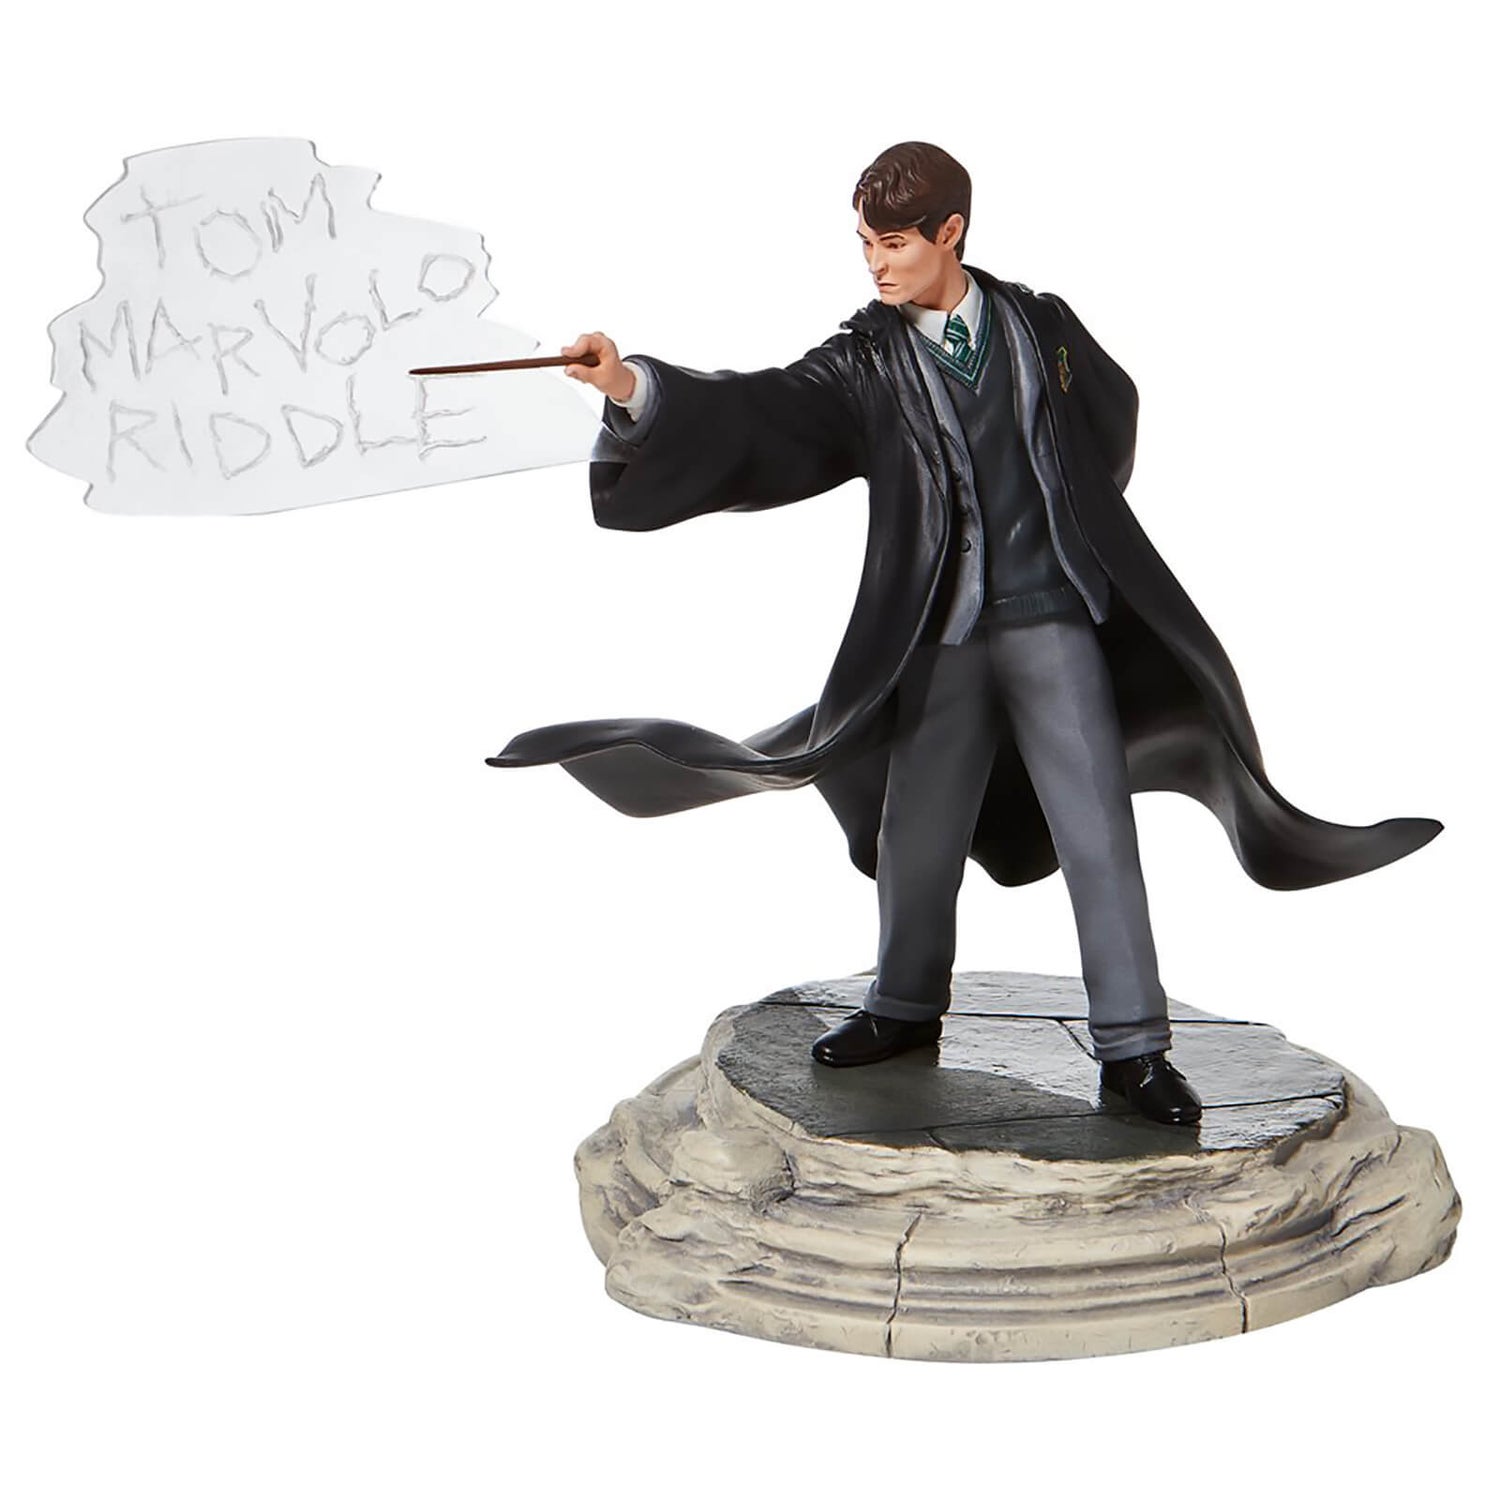 Wizarding World Of Harry Potter Tom Riddle Figurine